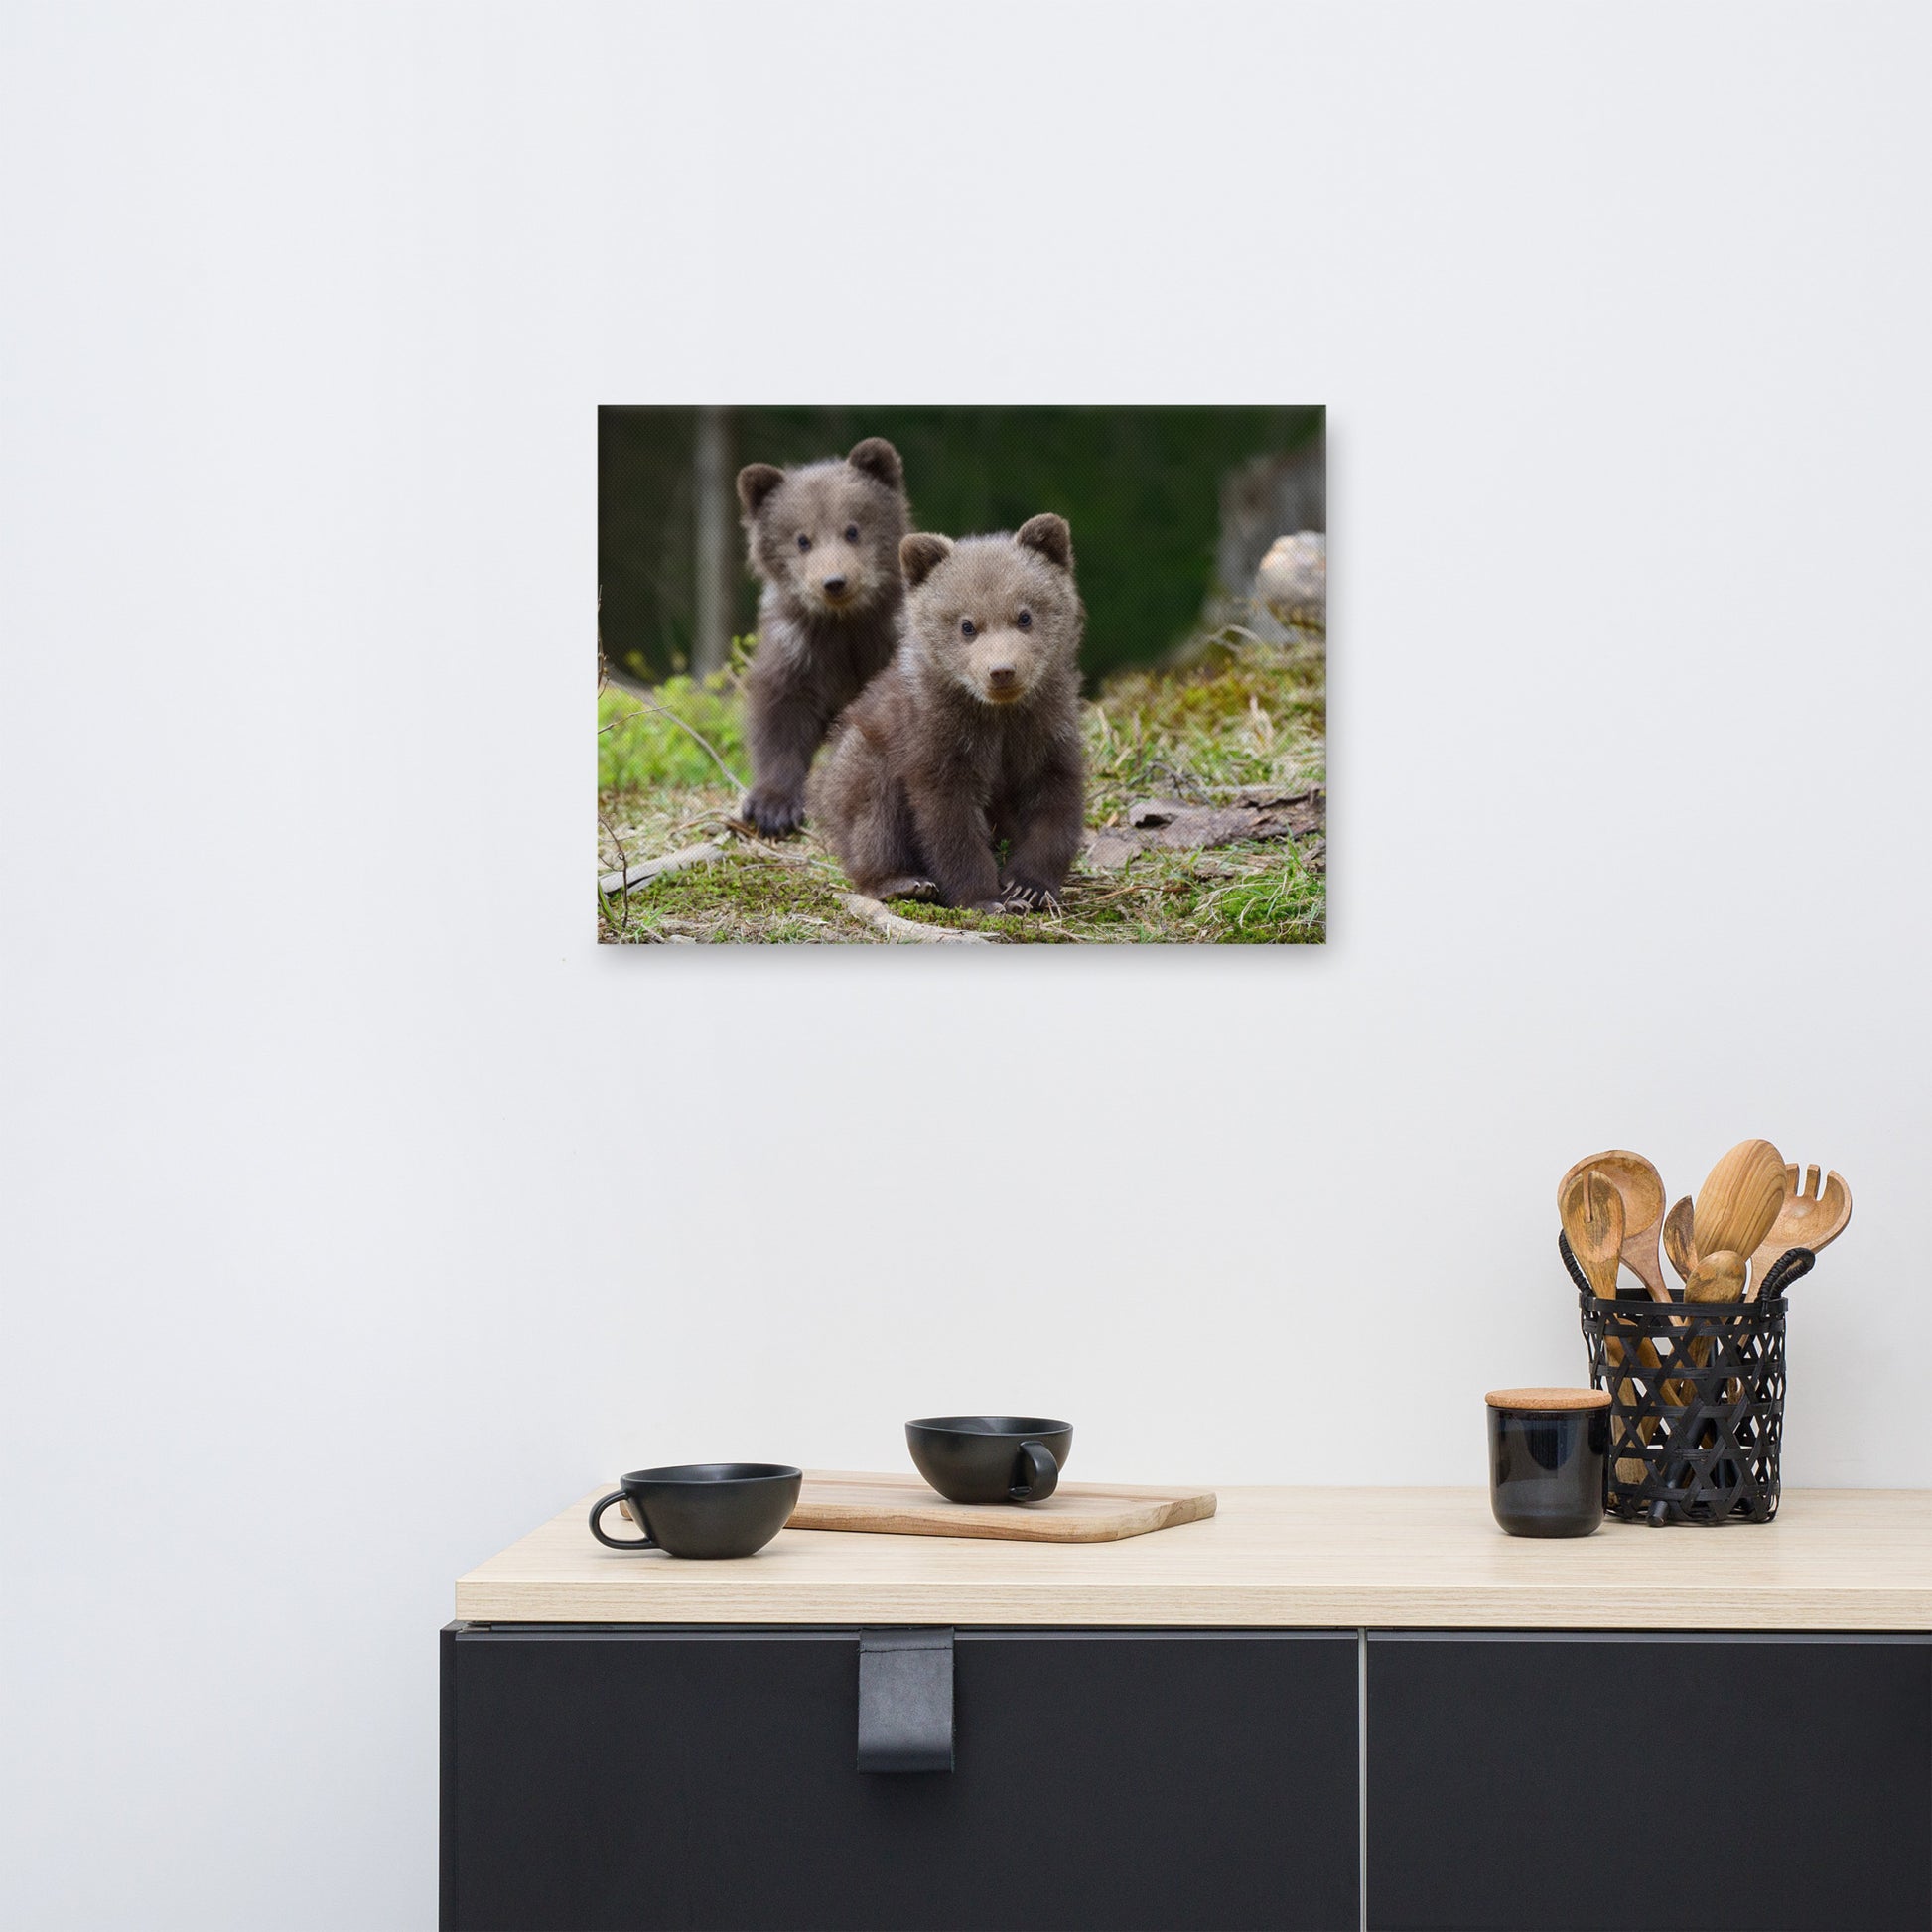 Simple Nursery Wall Art: Adorable Cubs In The Trees - Wildlife / Animal / Nature Photograph Canvas Wall Art Print - Artwork